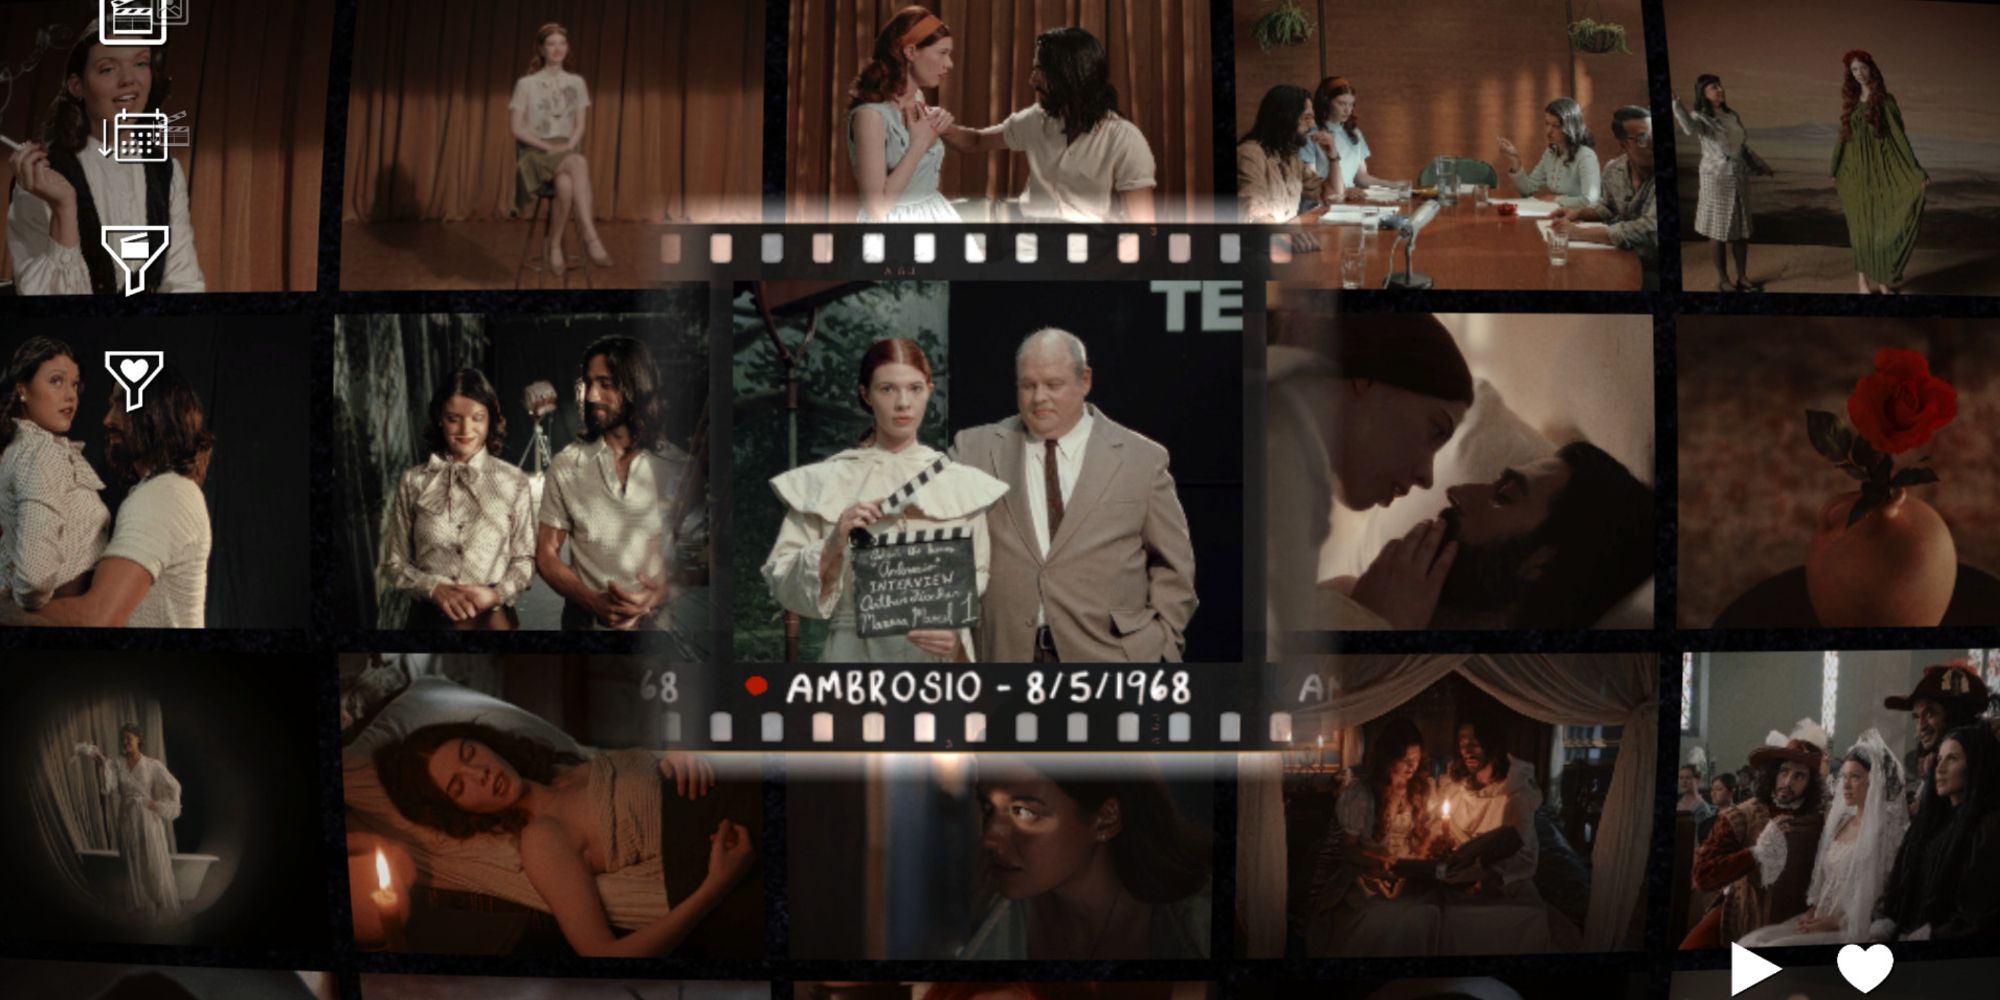 Combing through a variety of movie scenes in Immortality